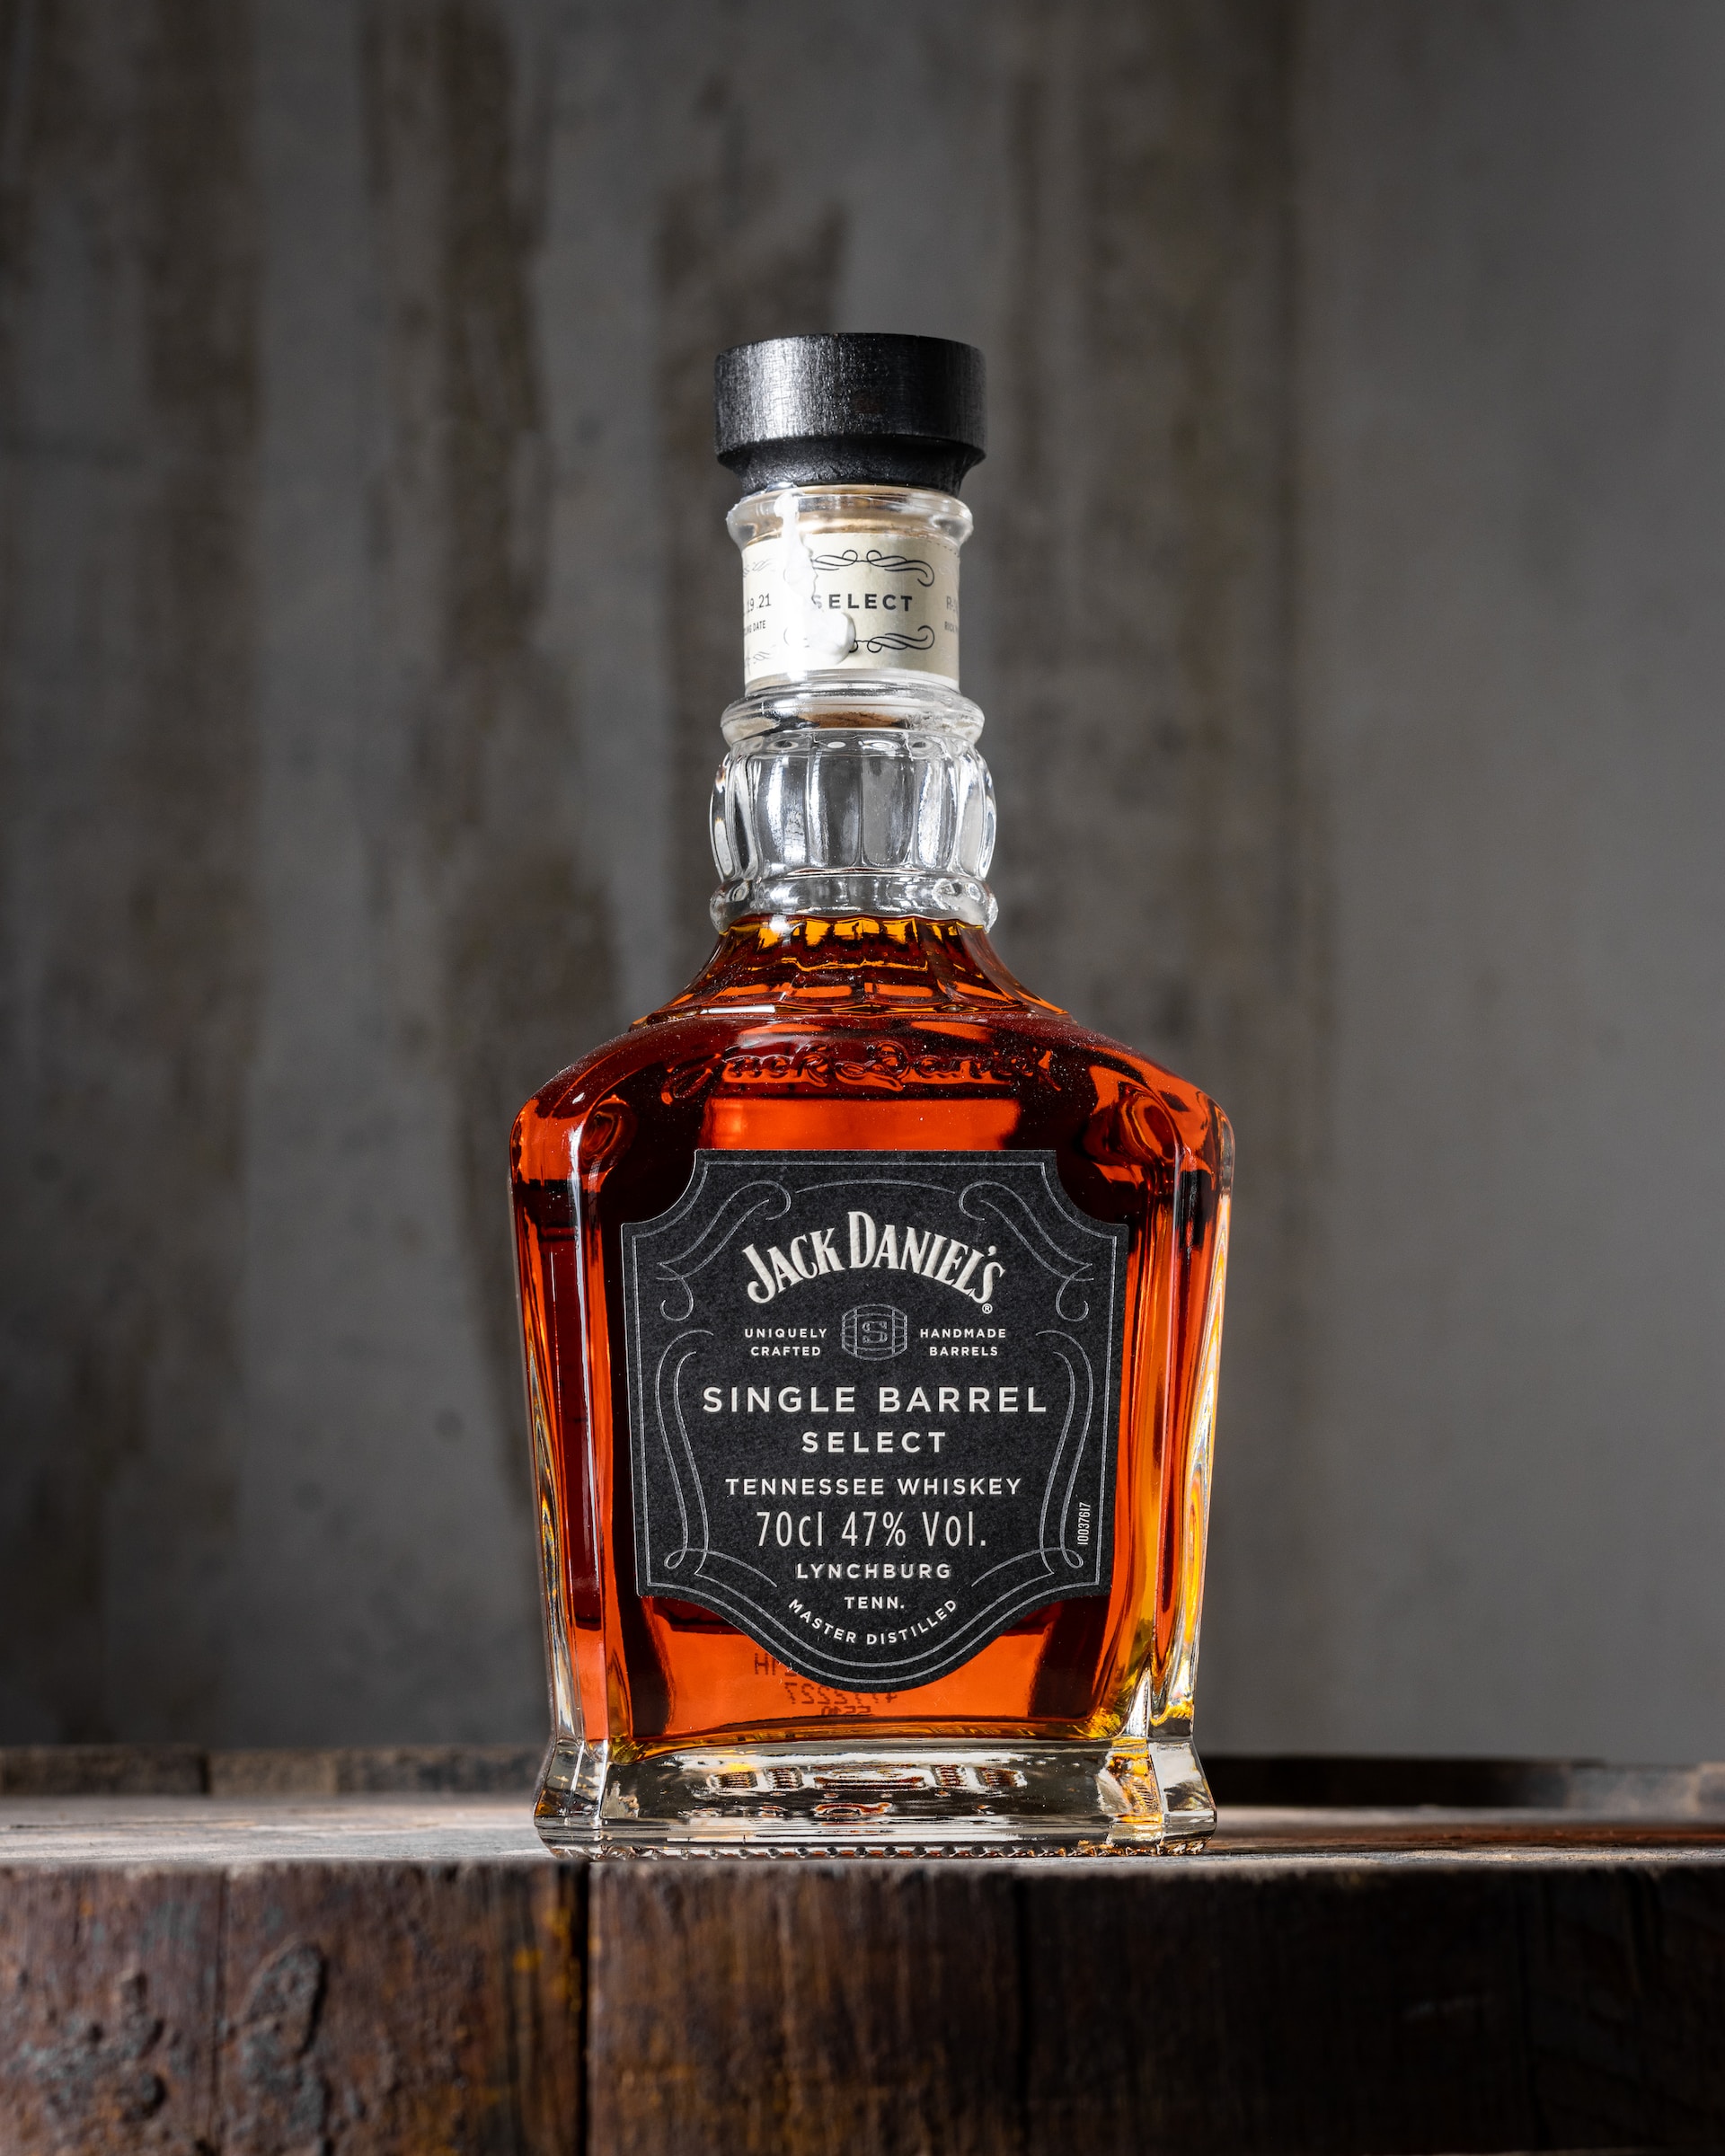 Jack Daniel's is a brand of Tennessee whiskey.